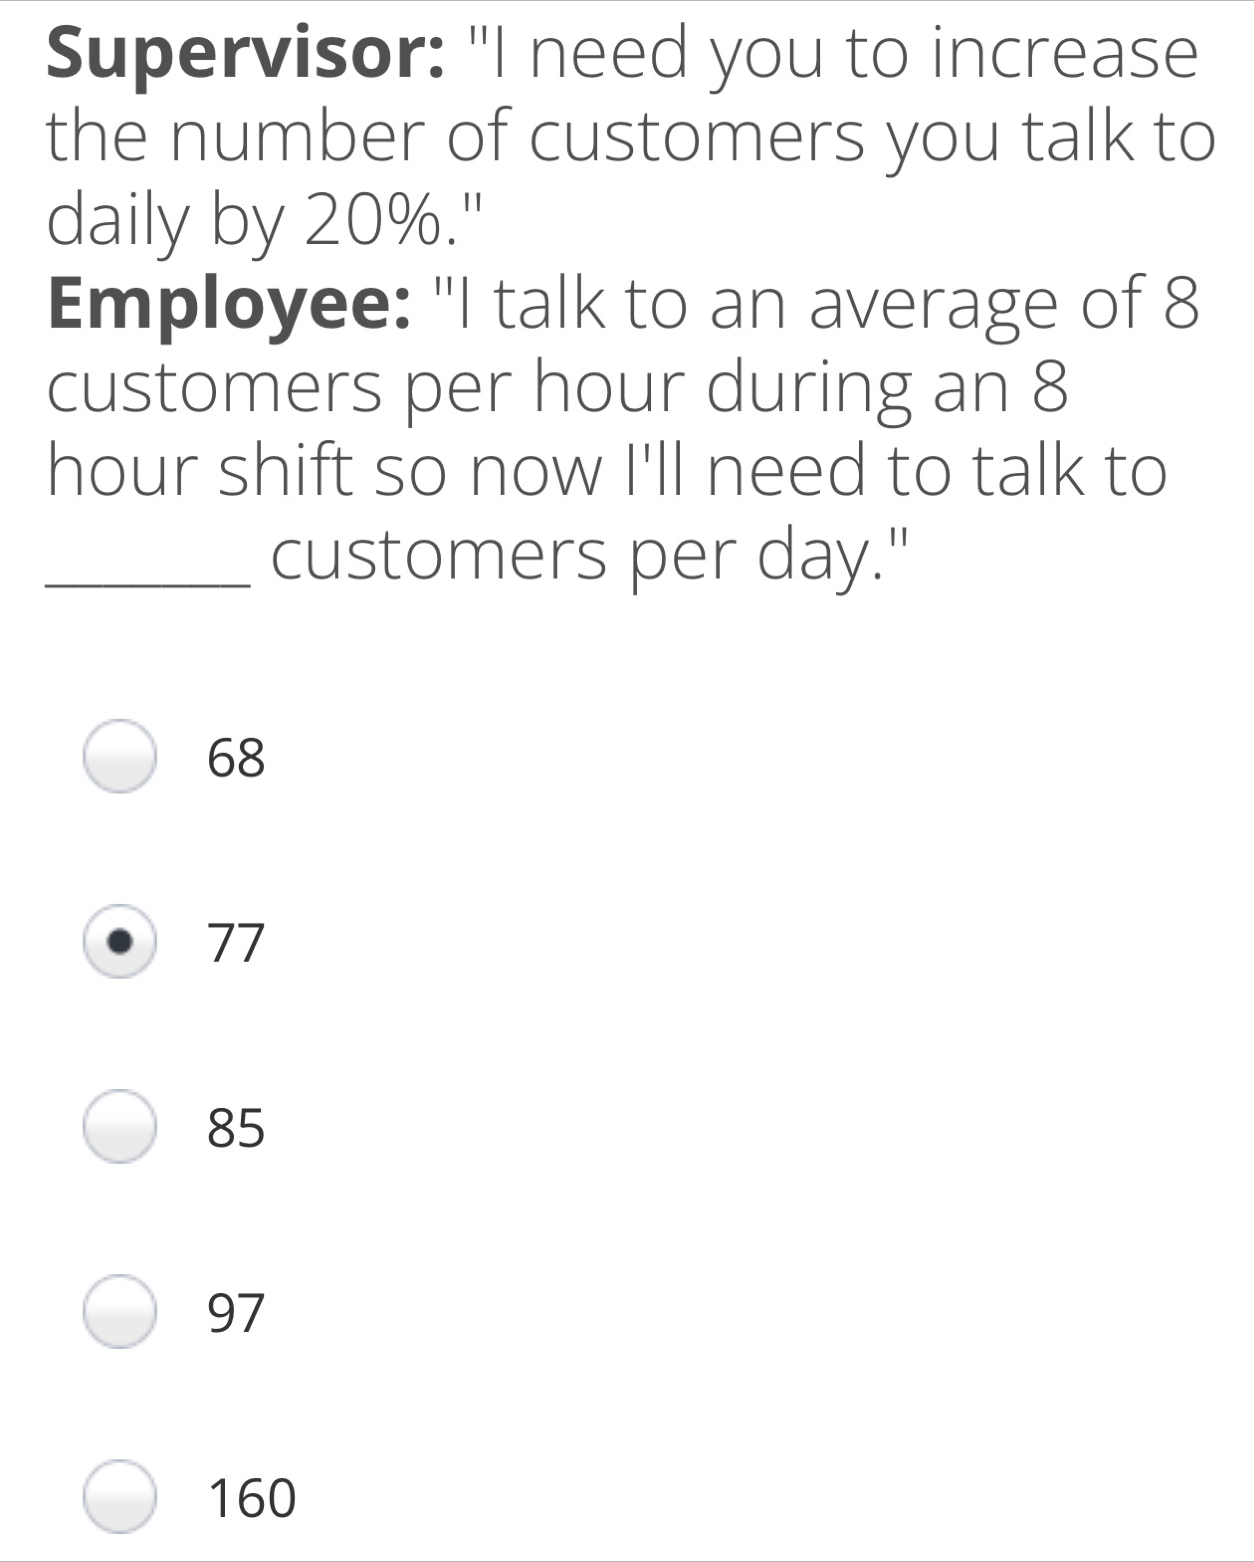 Supervisor: "I need you to increase the number of customers you talk to daily by 20%." Employee: "I talk to an average of 8 customers per hour during an 8 hour shift so now I'll need to talk to _customers per day." 68 77 85 97 160